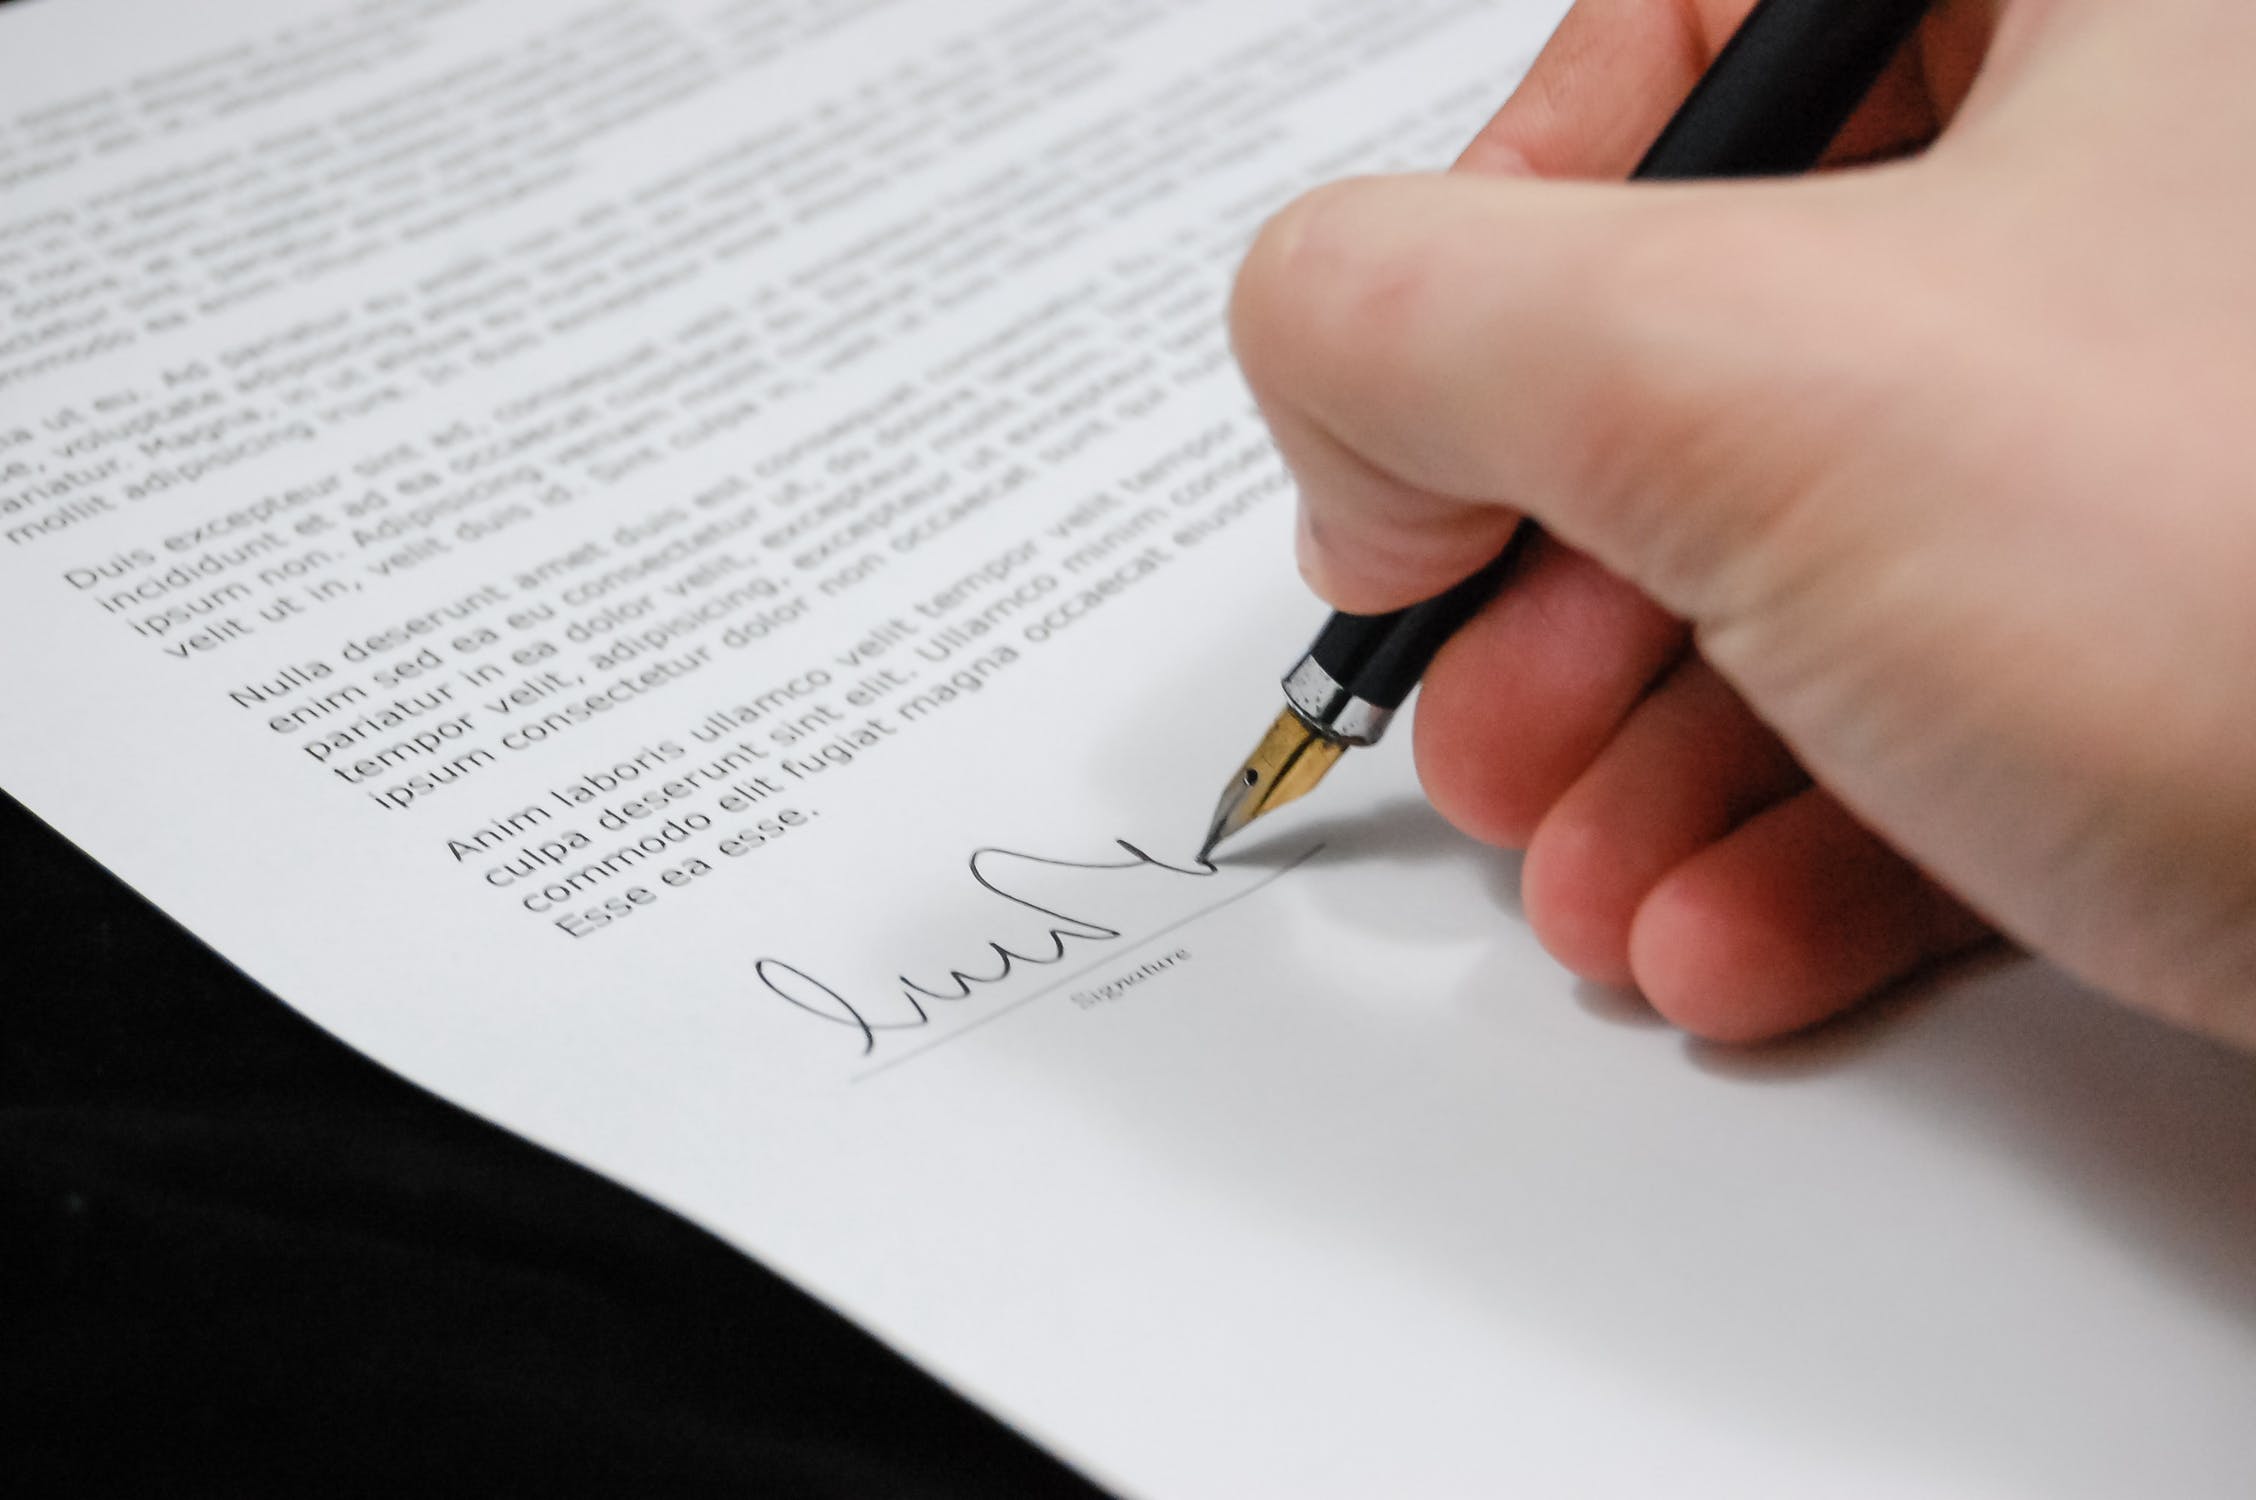 Party To Divorce Claims He Was Coerced Into Signing Agreement feature image